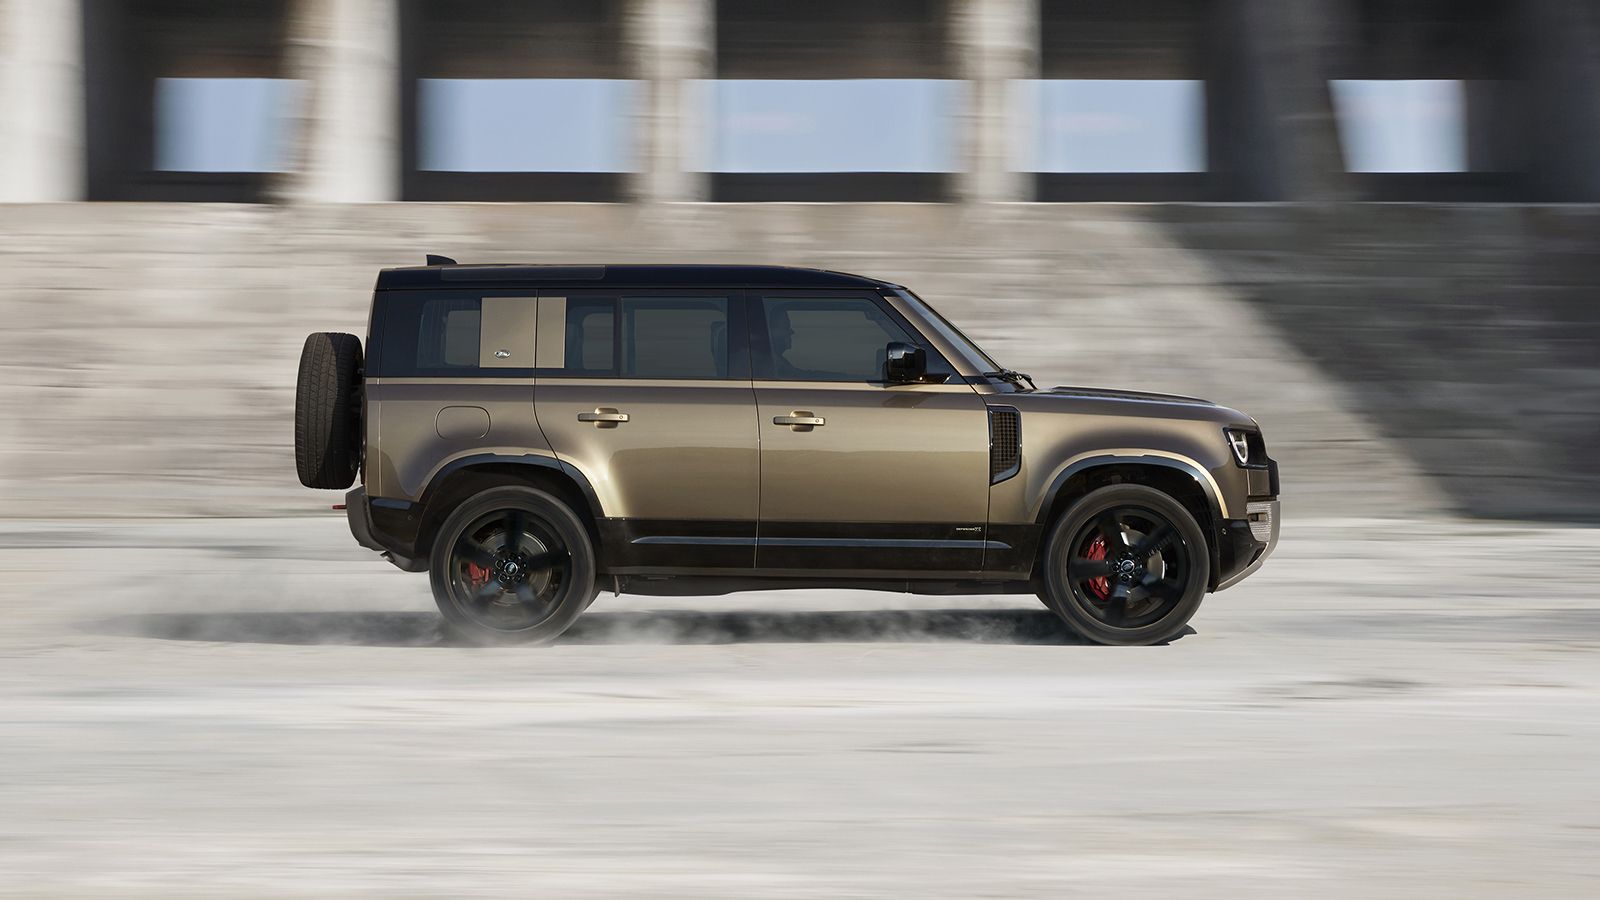 2020 Land Rover pricing, engines, options and photos